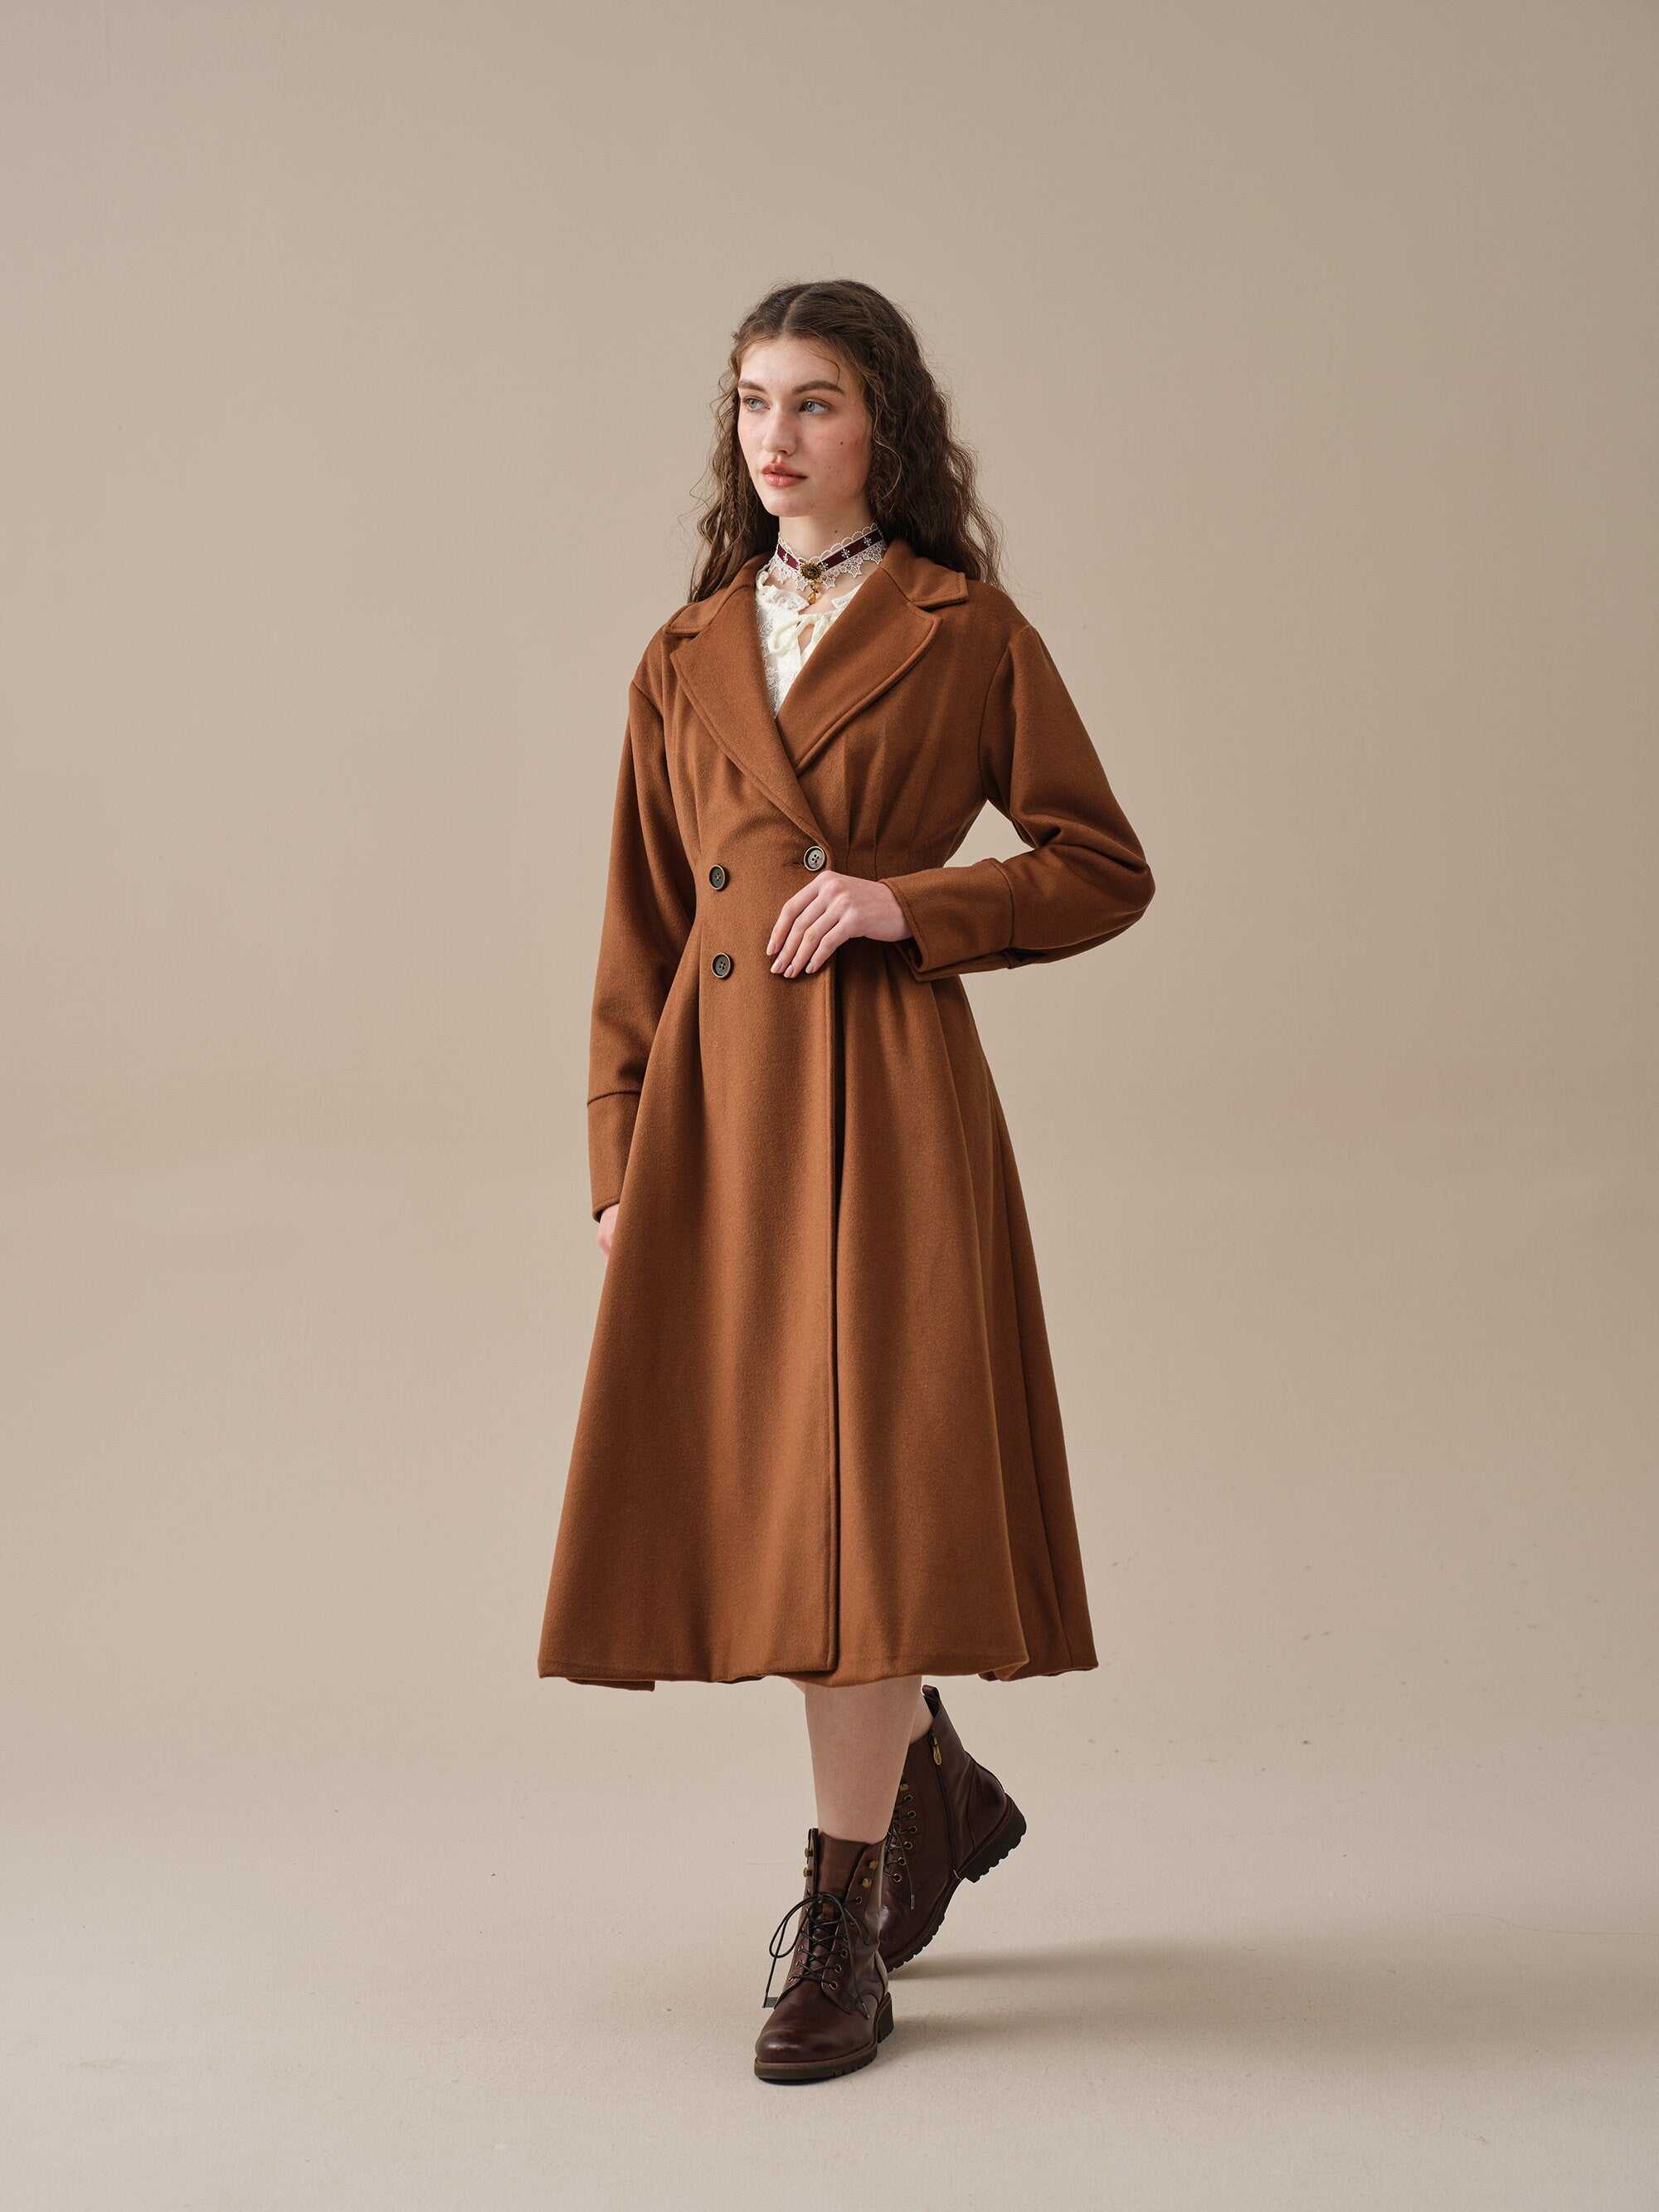 Linennaive, A ROMANCE 31 | DOUBLE BREASTED WOOL COAT